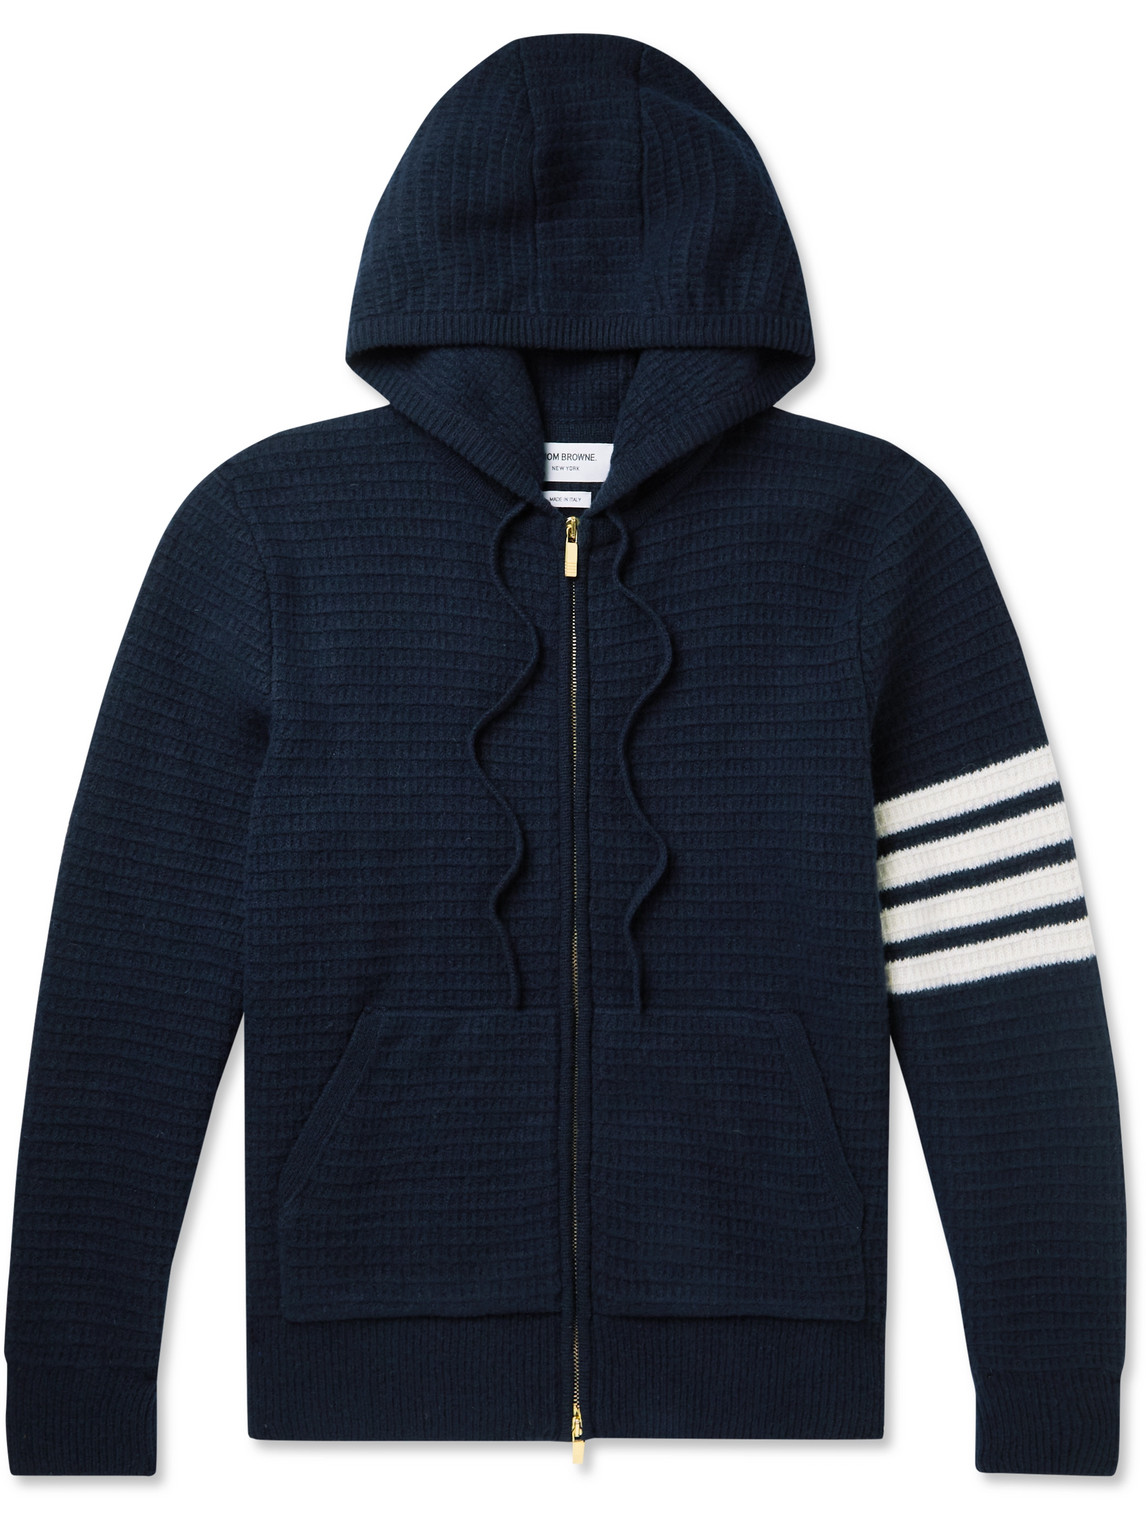 THOM BROWNE STRIPED WAFFLE-KNIT WOOL AND CASHMERE-BLEND ZIP-UP HOODIE